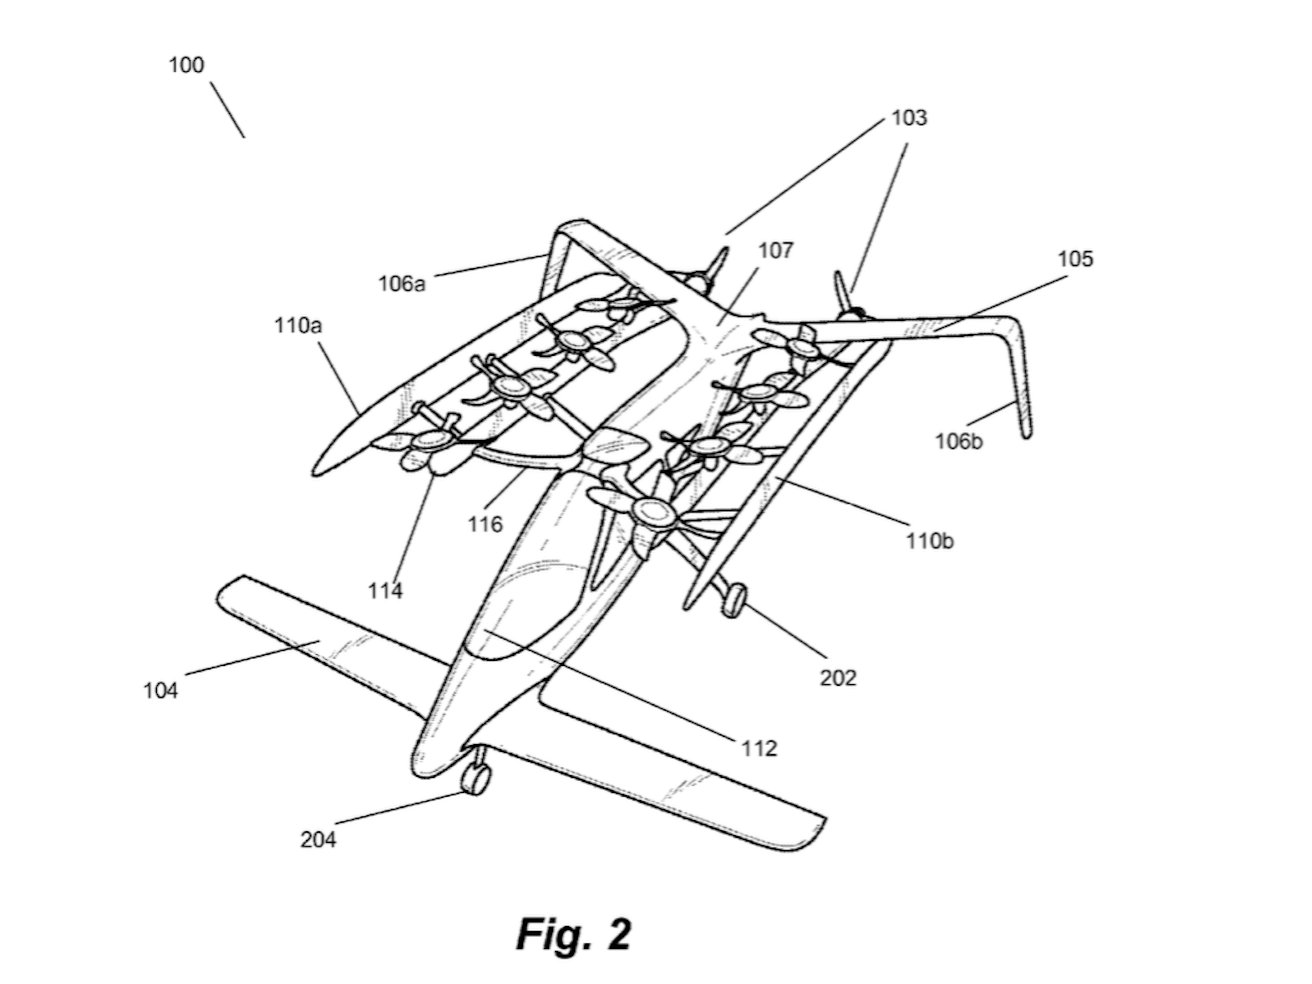 Google’s Larry Page Has Been Secretly Investing In Flying-Car Start-Ups